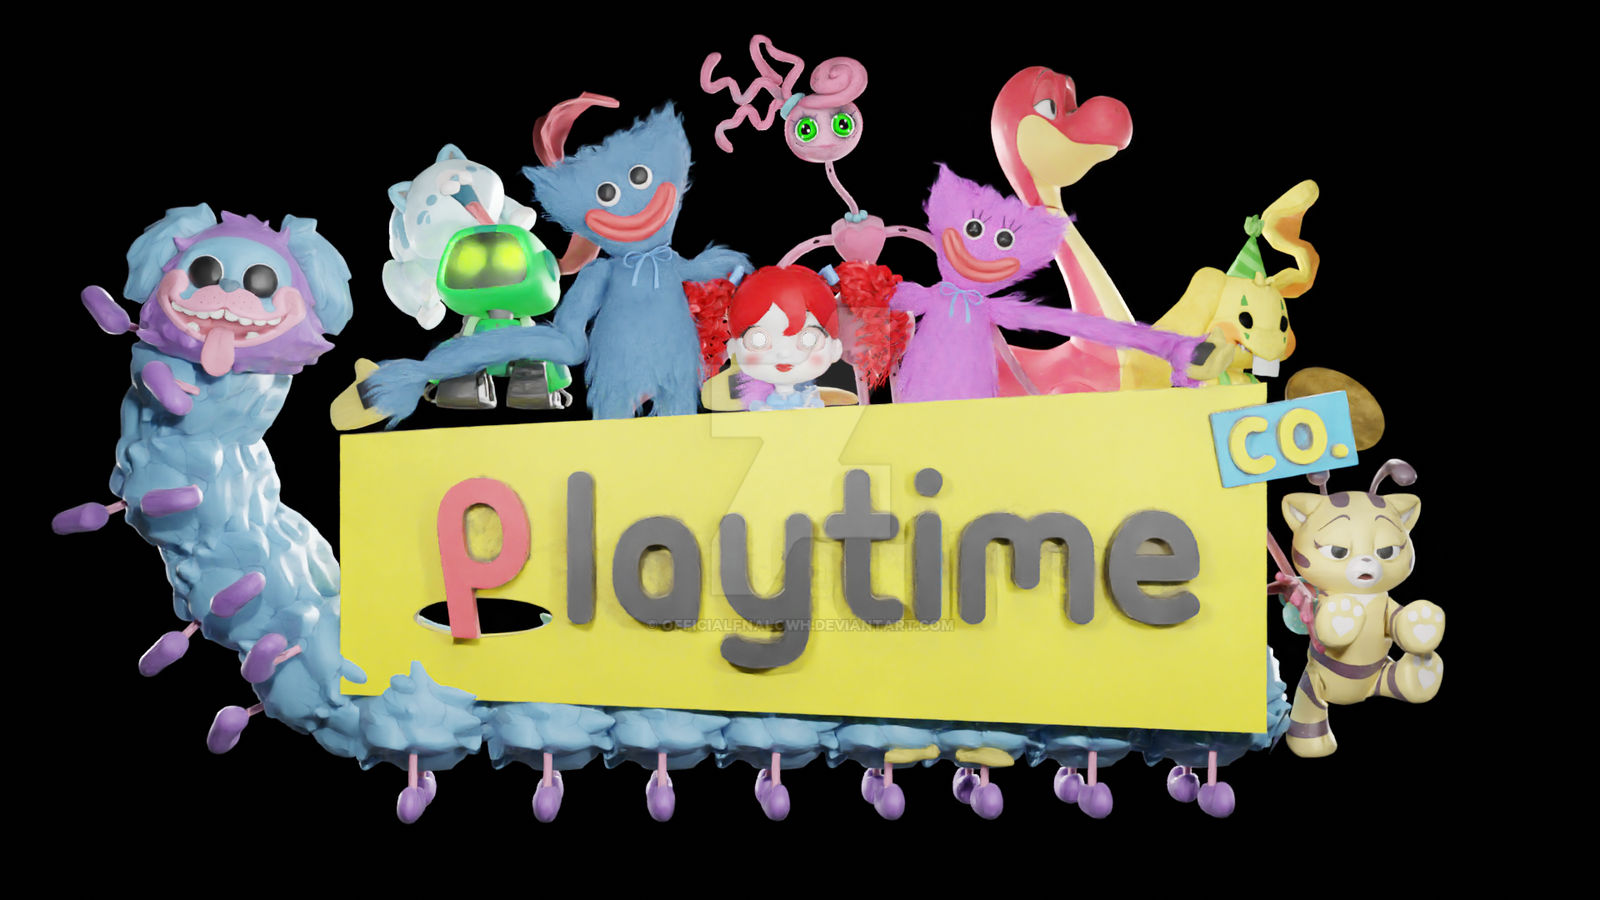 Playtime Co Game Station with the Company's Toys by JDL2016 on DeviantArt